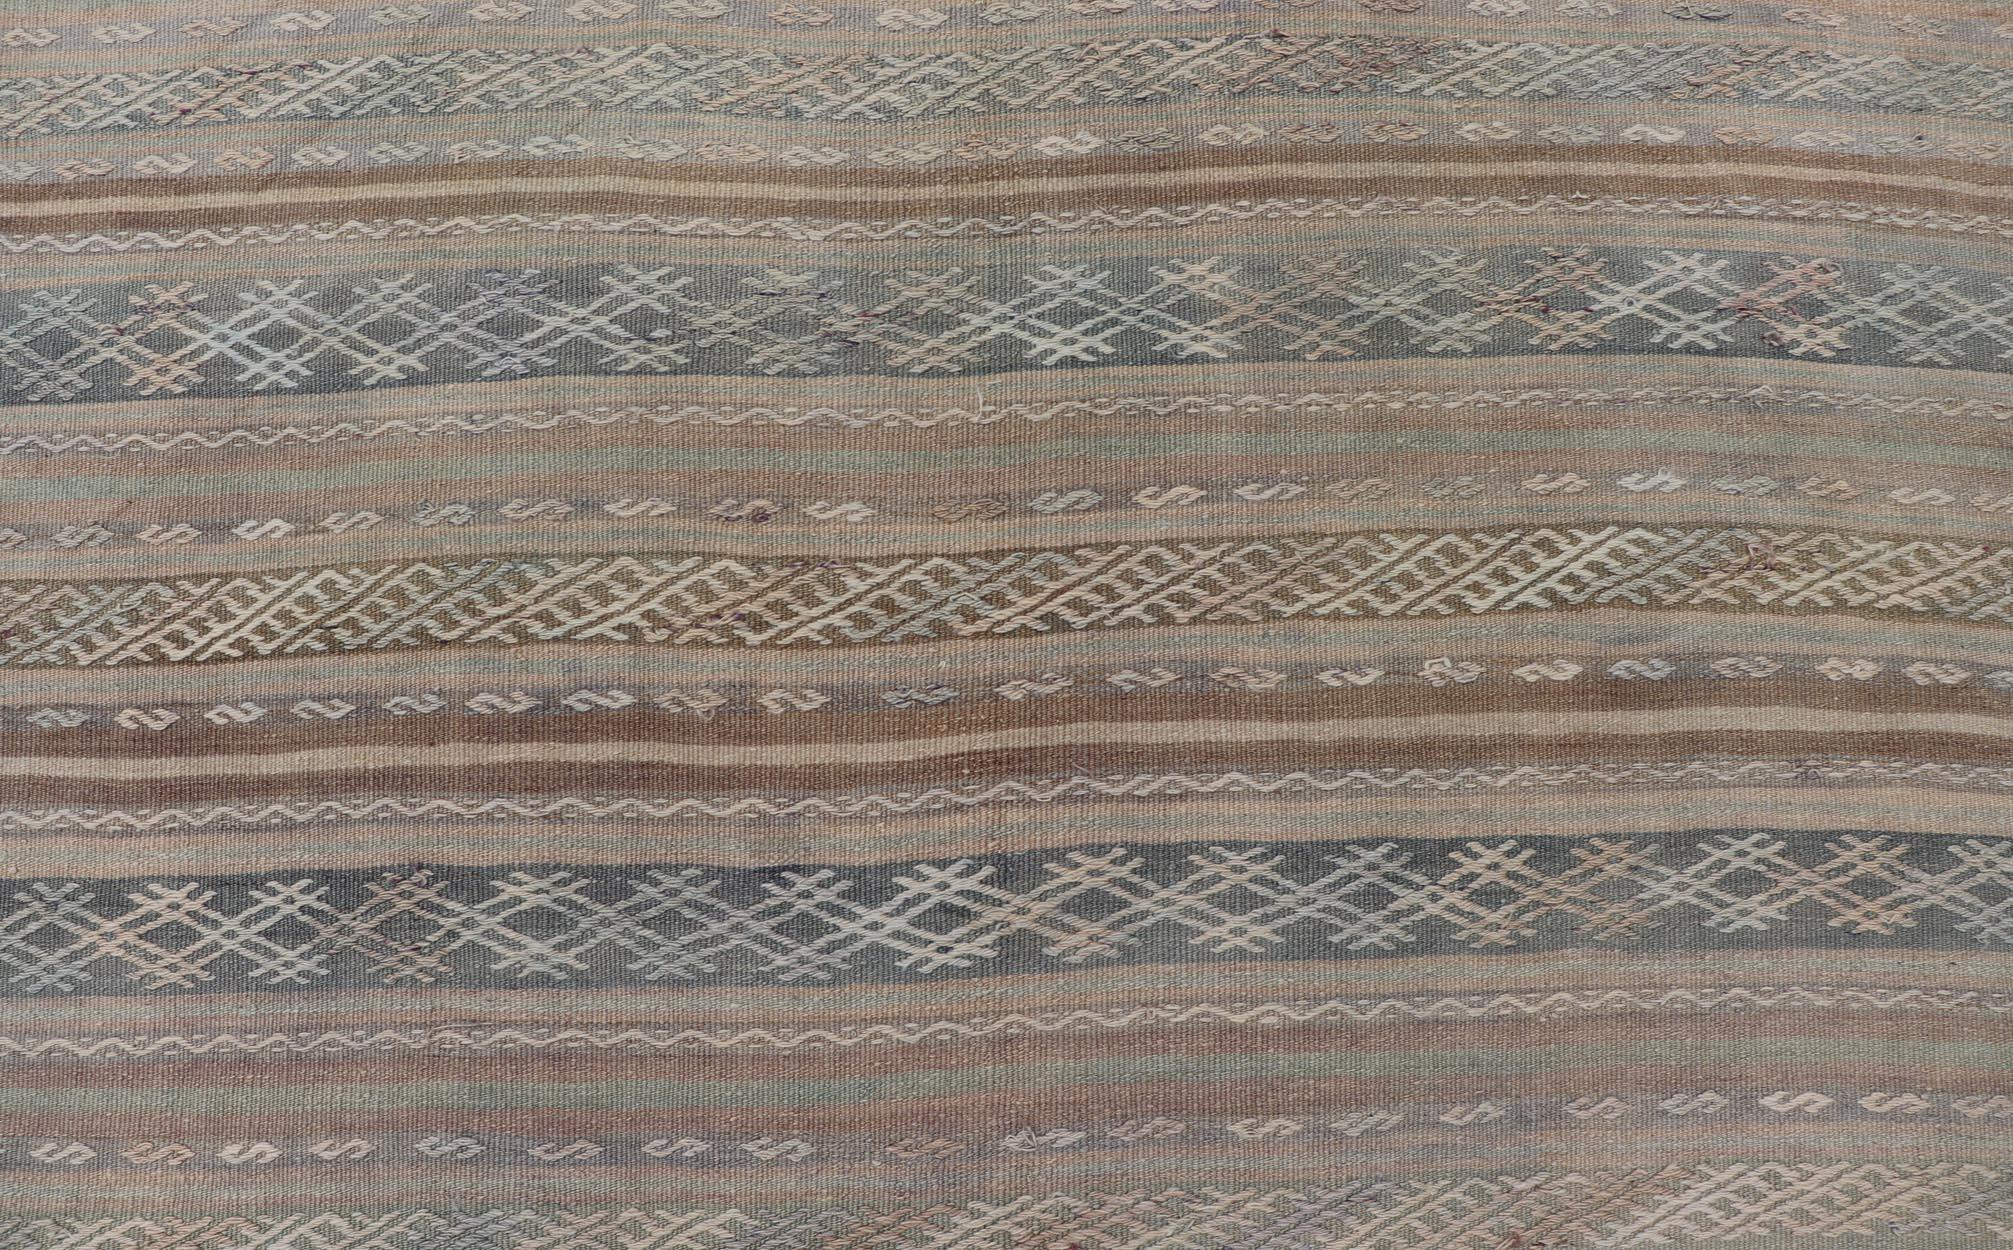 Vintage Turkish Flat-Weave Kilim with Embroideries in Muted Tones and Stripes. Keivan Woven Arts / rug EN-15180, country of origin / type: Turkey / Kilim, circa 1950
Measures: 5'2 x 8'3 
This vintage Turkish Kilim rug features a contemporary